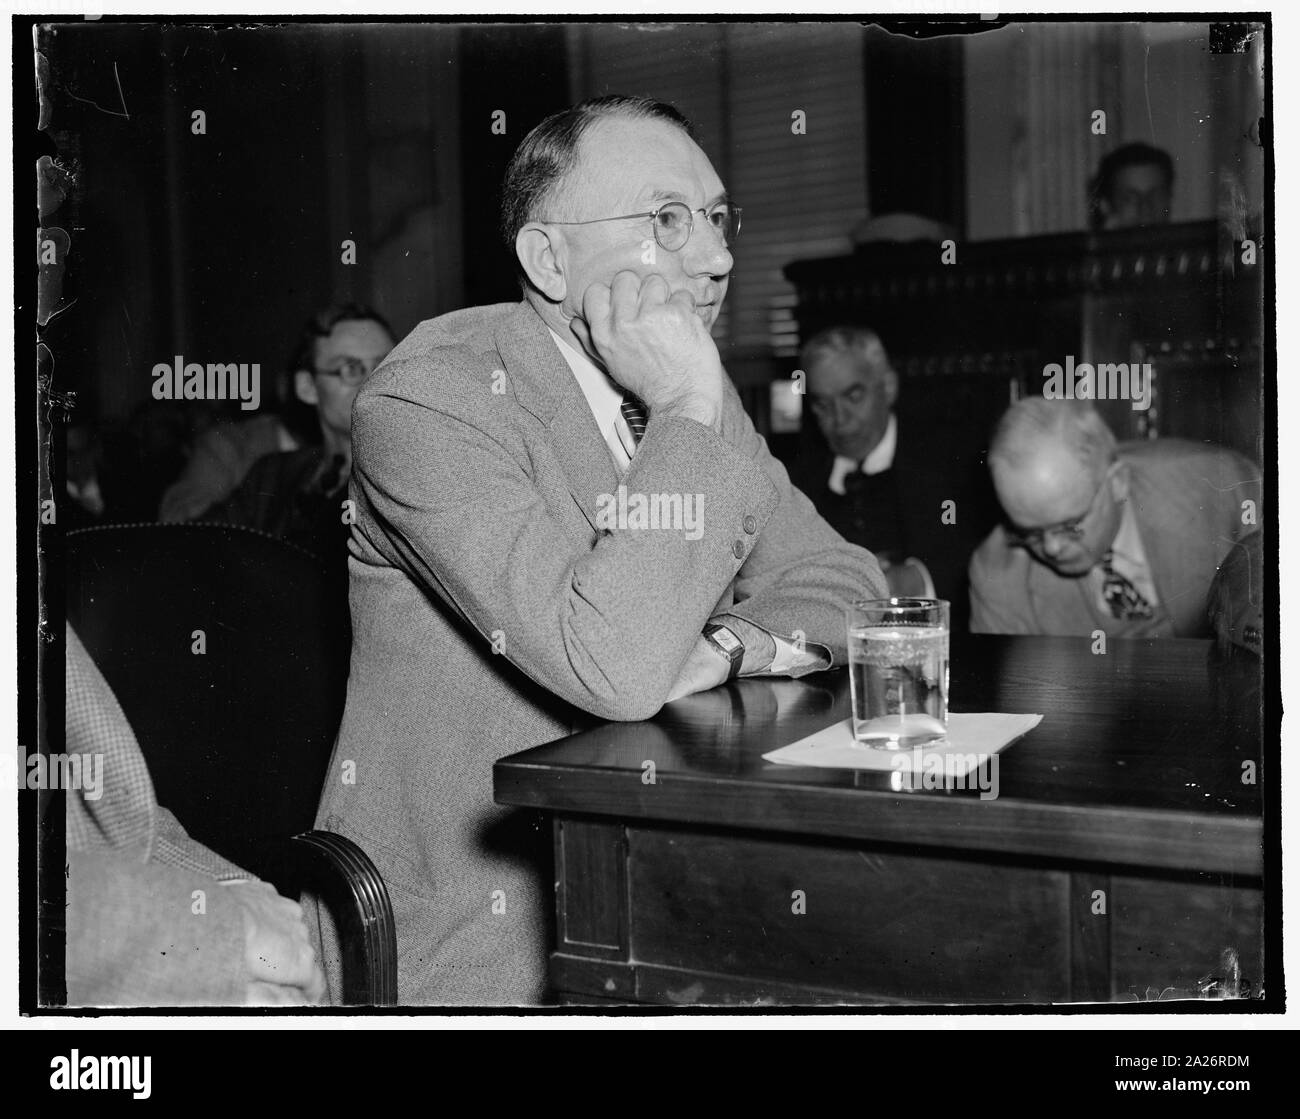 Poor memory. Washington, D.C., April 30. Testifying before the Senate Civil Liberties Committee today, George S. Ward, Secretary of the Harlan County (Ky.) Coal Operators Association, said he had been very careful not to know what his chief deputy did with the association's expense money. The chief deputy, Ben Unthank, has been missing since the Committee investigators, armed with subpoenas, began searching for him two months ago. The Committee is investigating labor-conditions in bloody Harlan County, 4/30/1937 Stock Photo